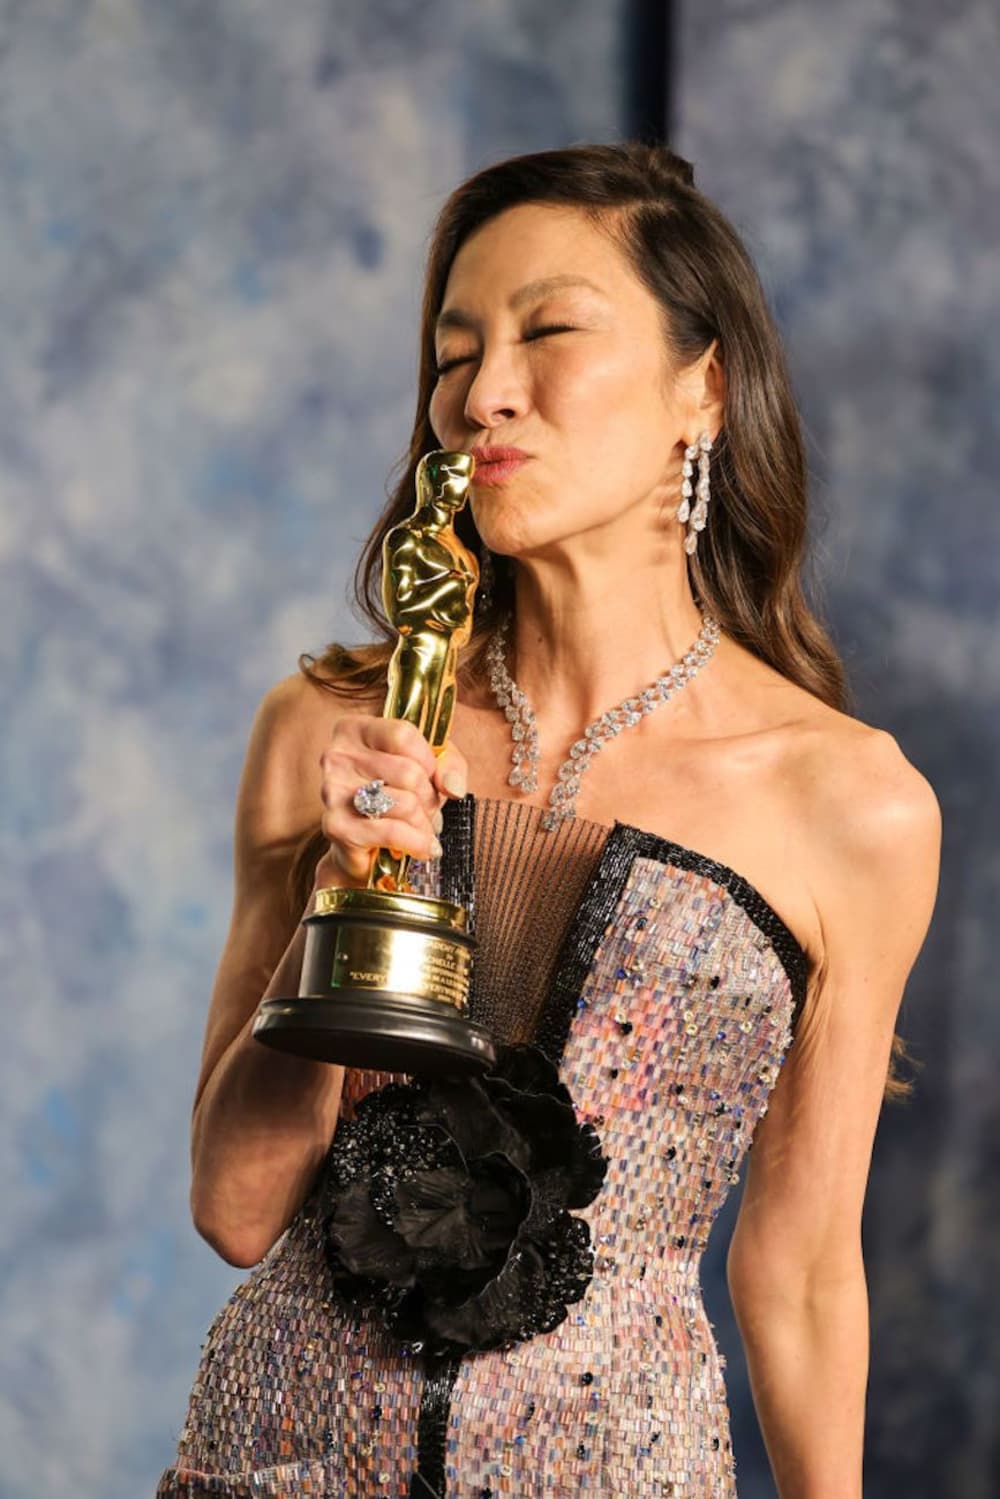 Jamie Lee Curtis Bondage Porn - Michelle Yeoh makes history at this year's Oscars - Woo